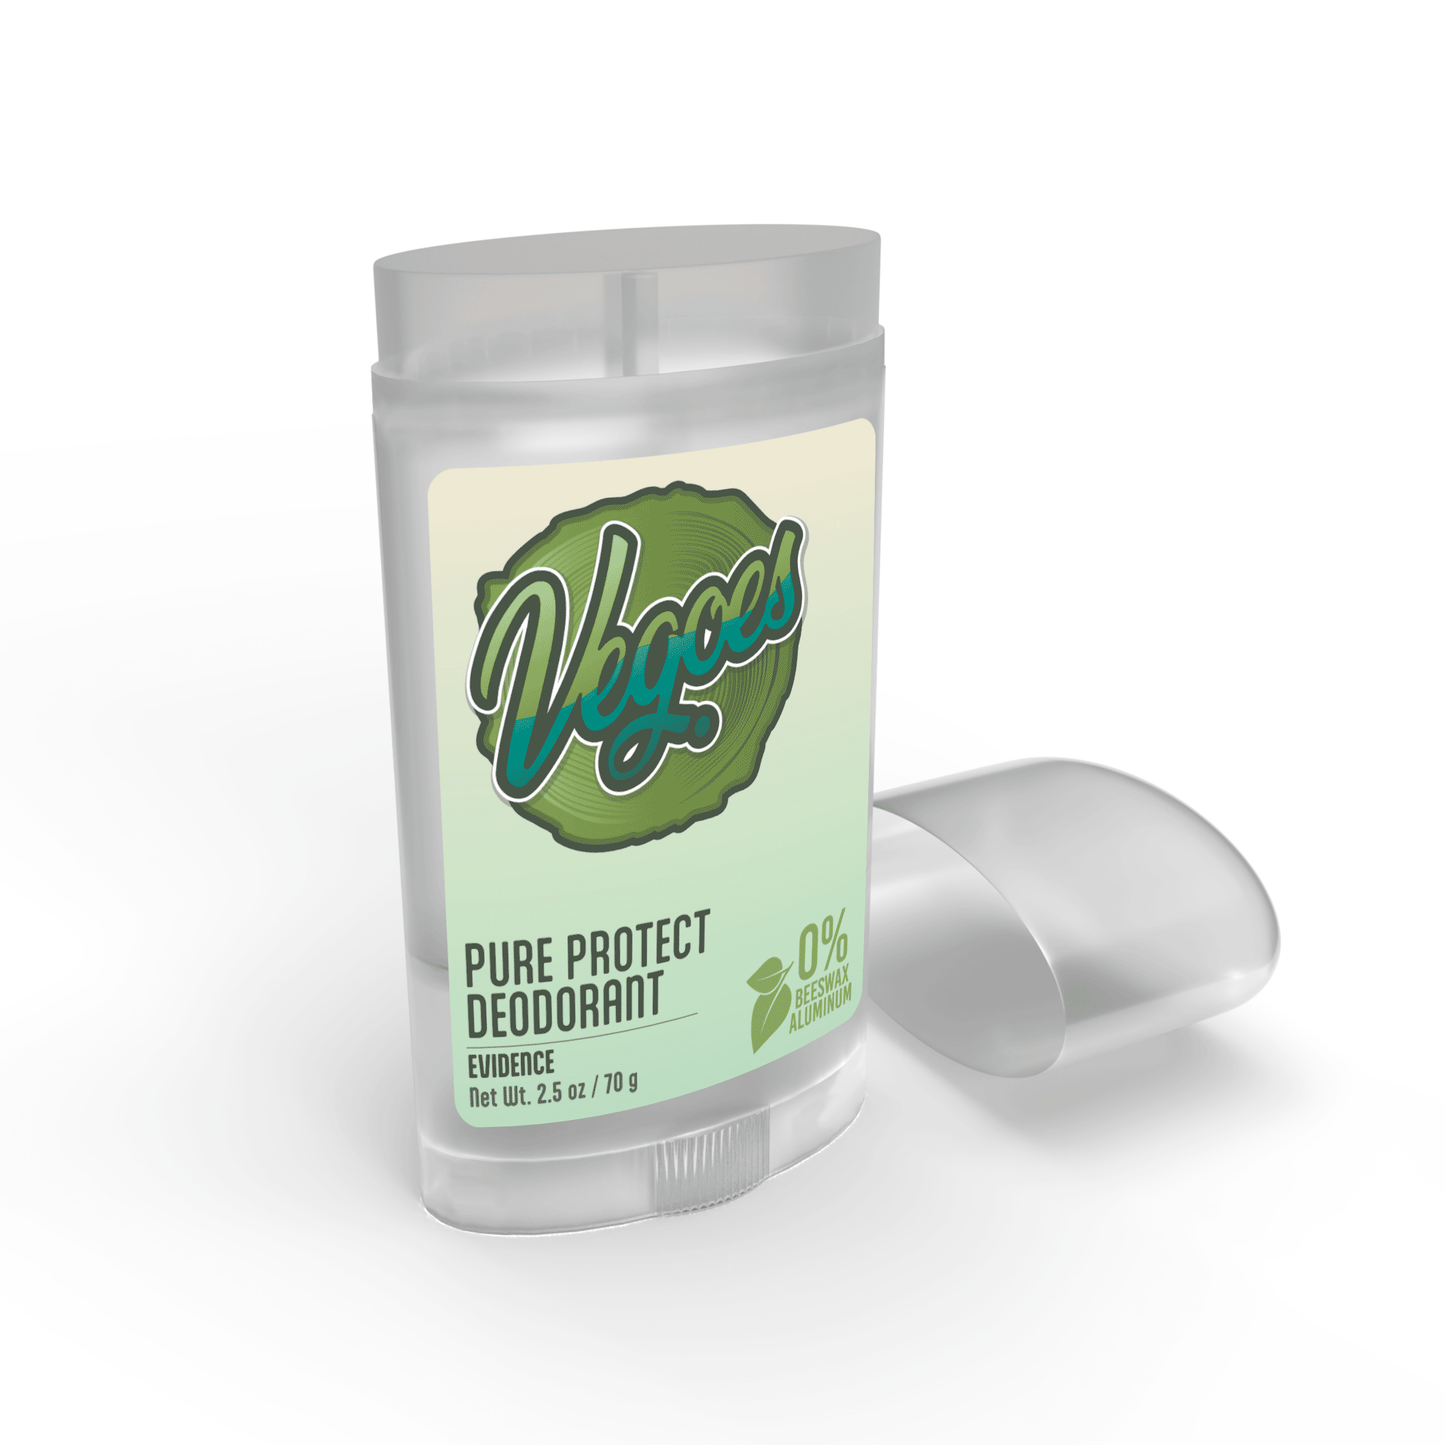 Evidence Pure Protect Deodorant